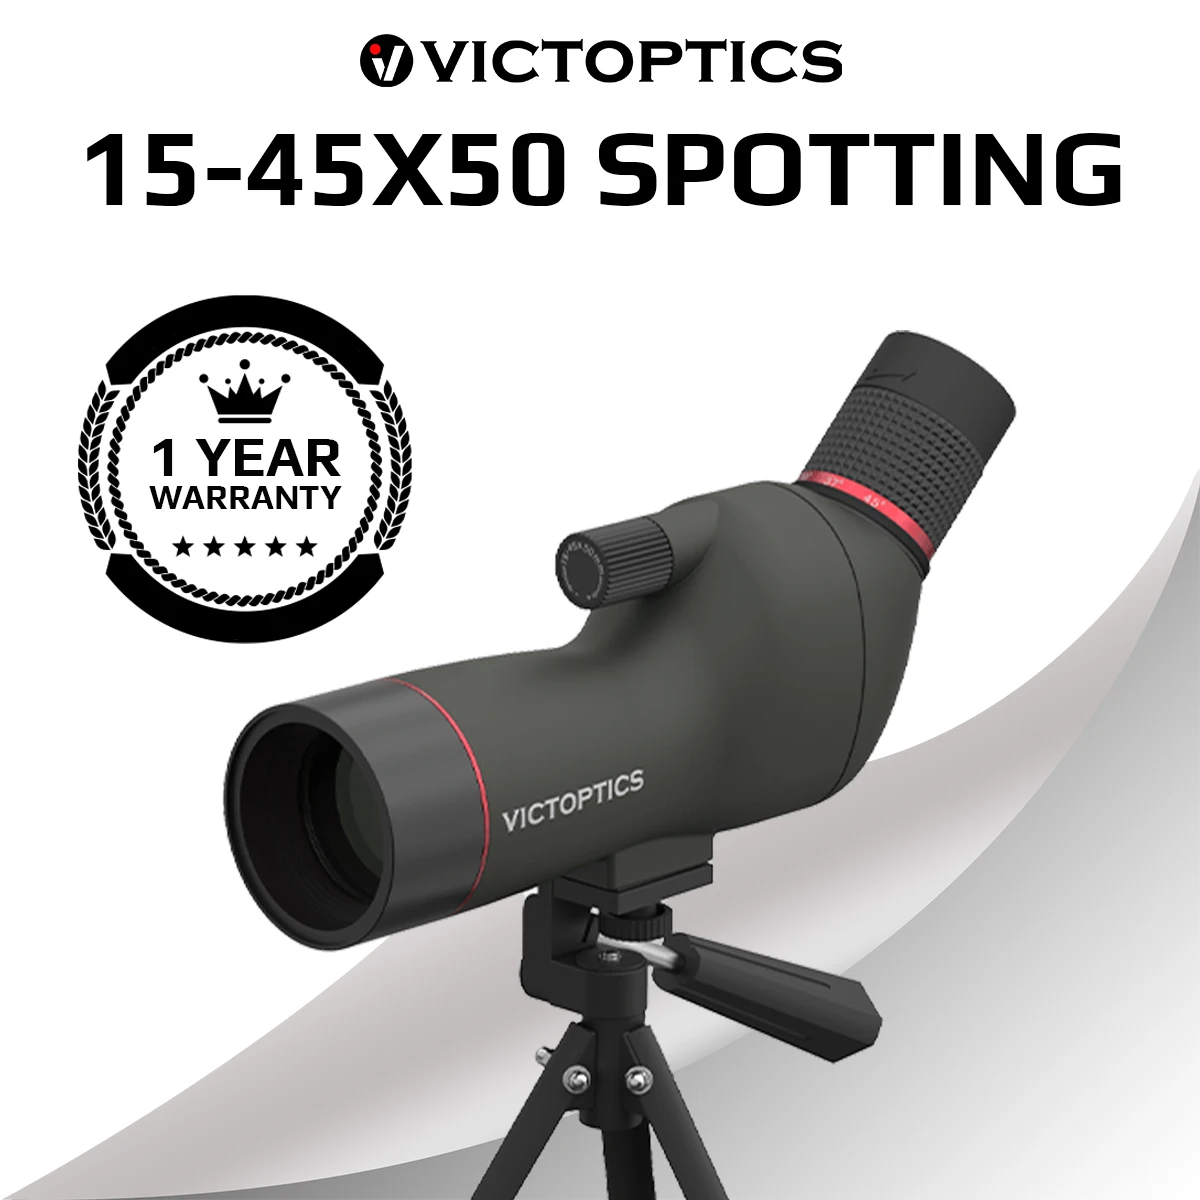 

Victoptics 15-45x50 Lightweight Spotting Scope BAK7 Prism Fully-multi Coated With Tripod For Bird Watching & Wildlife Viewing